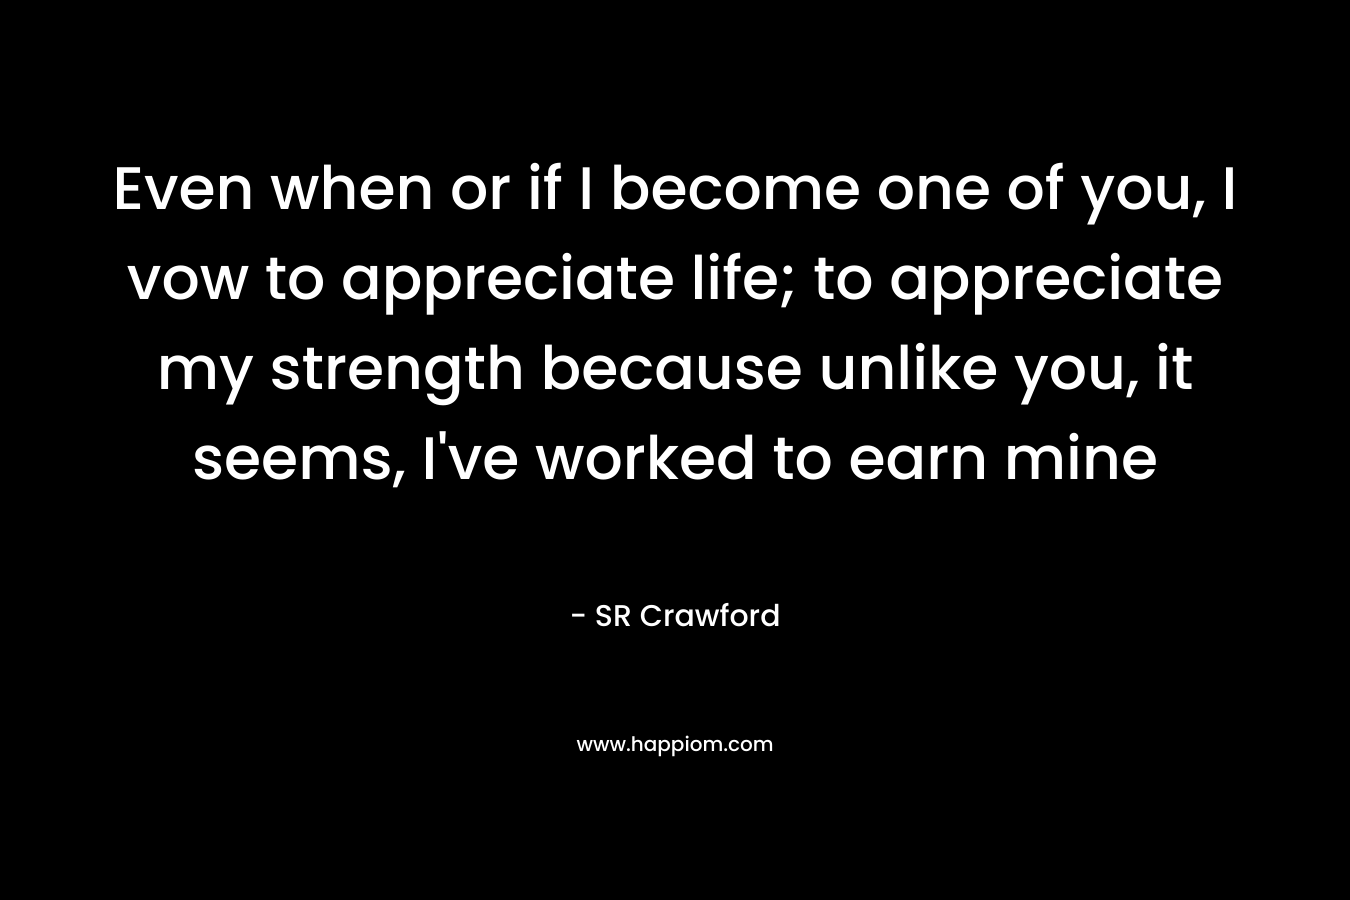 Even when or if I become one of you, I vow to appreciate life; to appreciate my strength because unlike you, it seems, I’ve worked to earn mine – SR Crawford